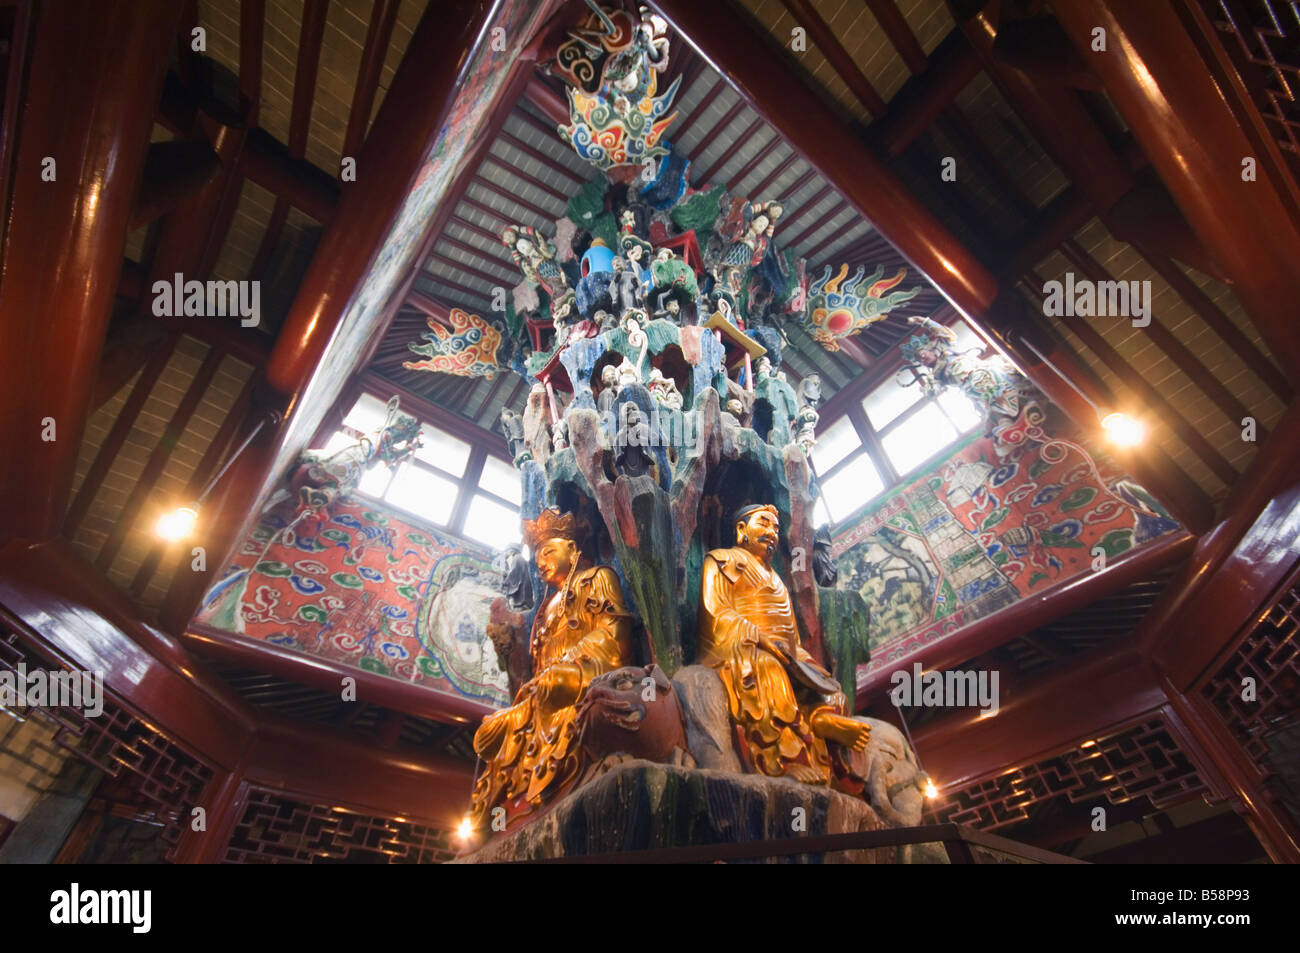 The decorated ceiling and golden statues at West Garden Buddhist Temple, Suzhou, Jiangsu Province, China Stock Photo